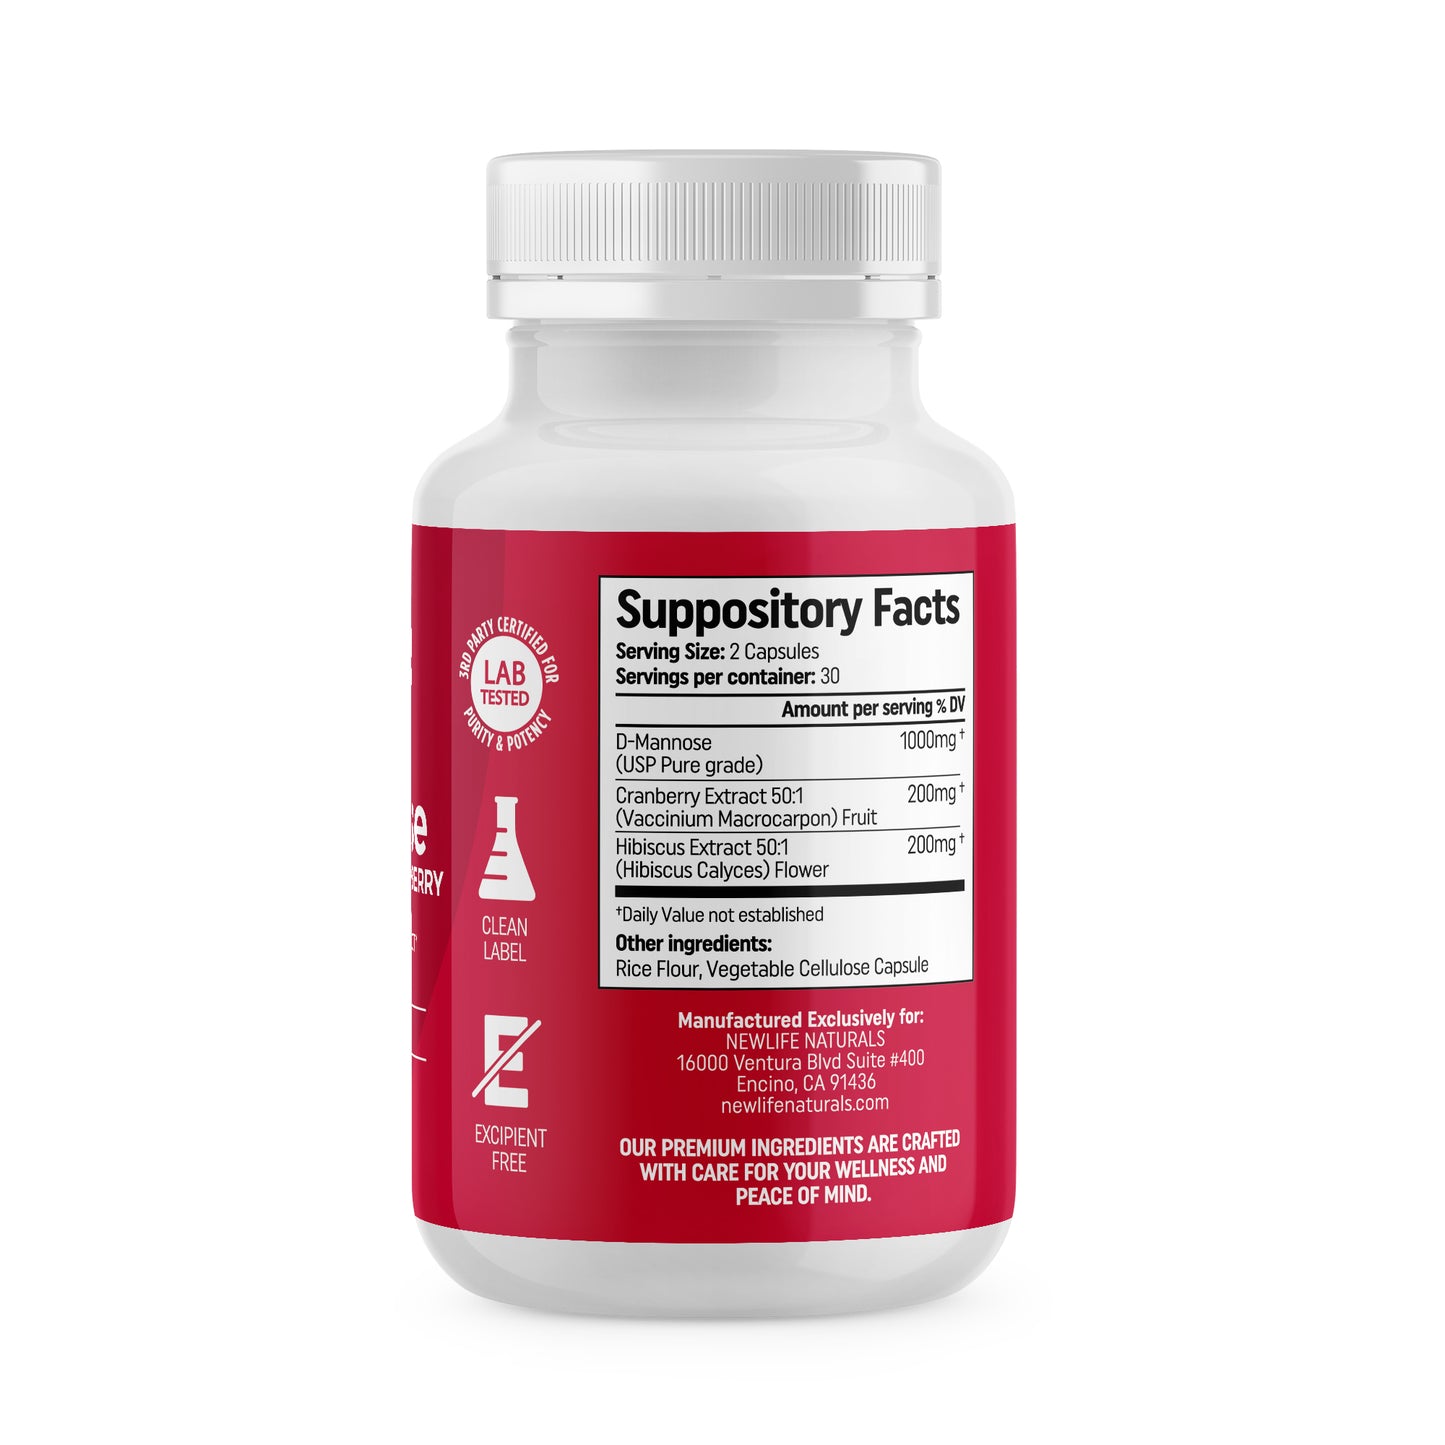 D-Mannose with Cranberry and Hibiscus - 60 Capsules